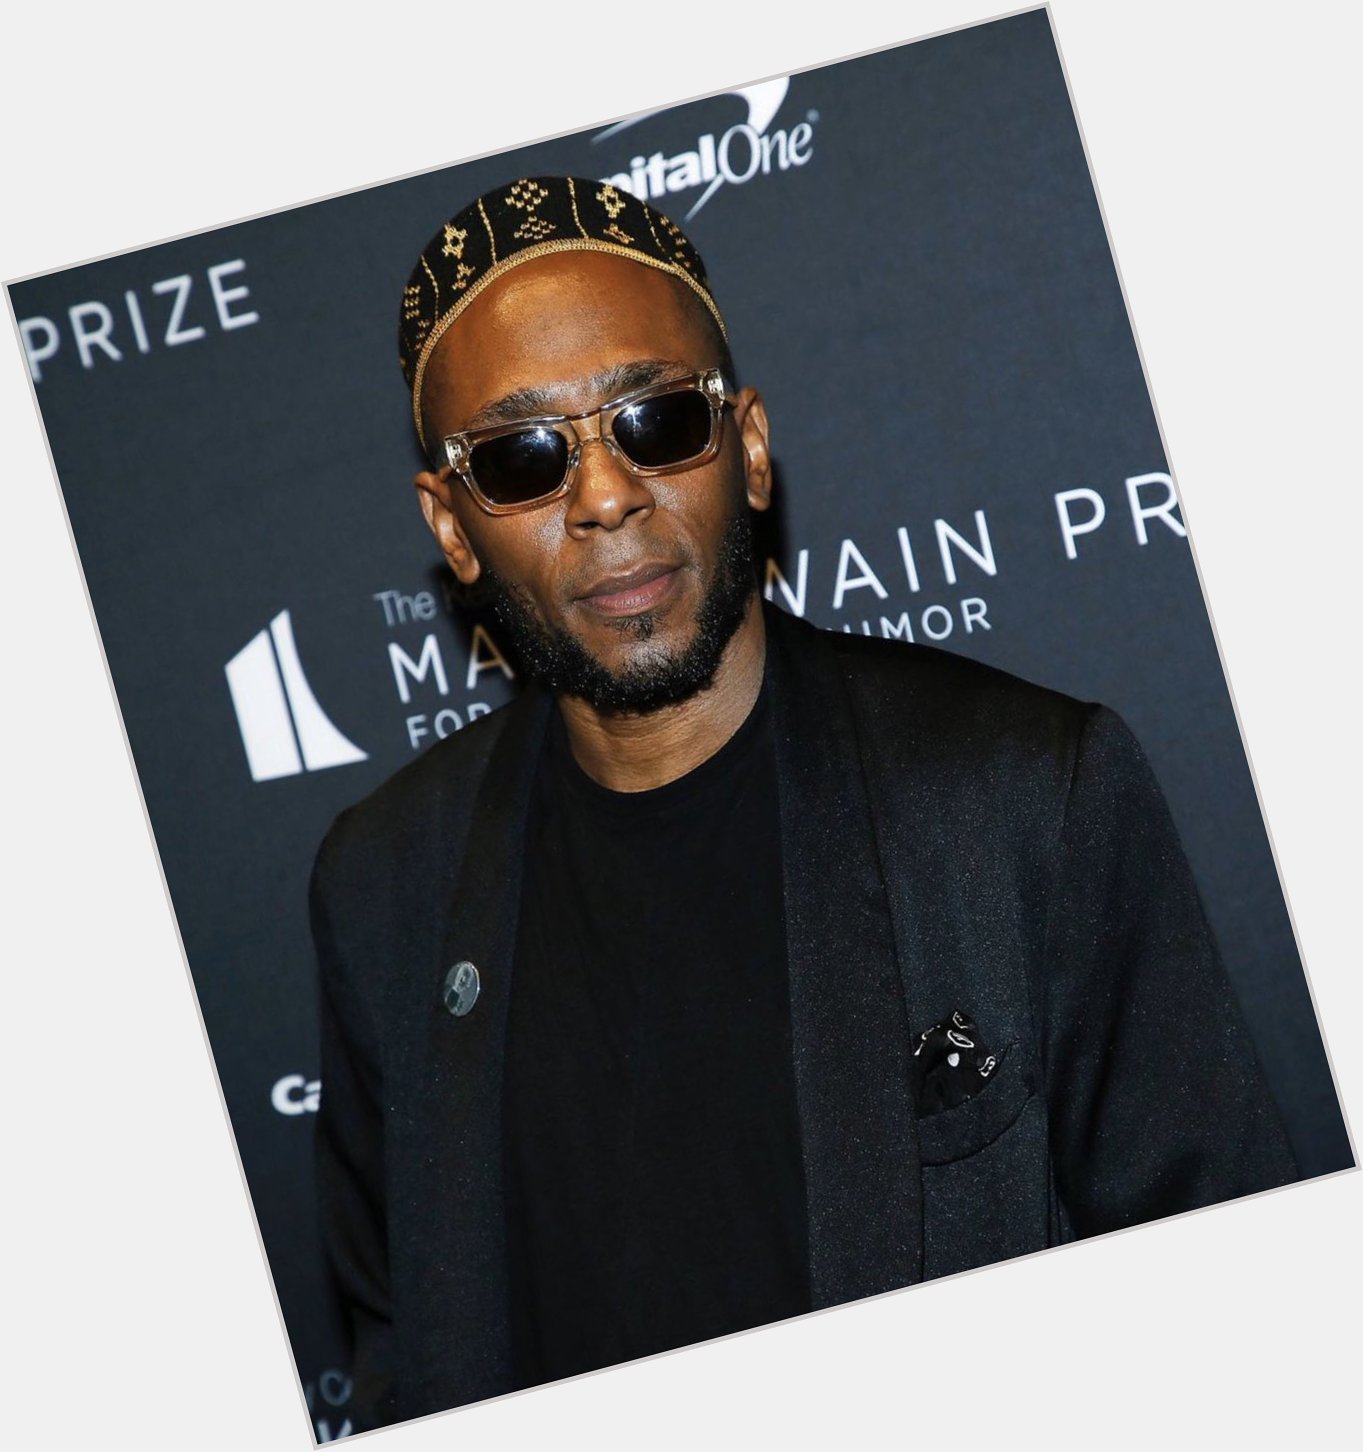 Happy Birthday Mos Def Favorite track from him? 